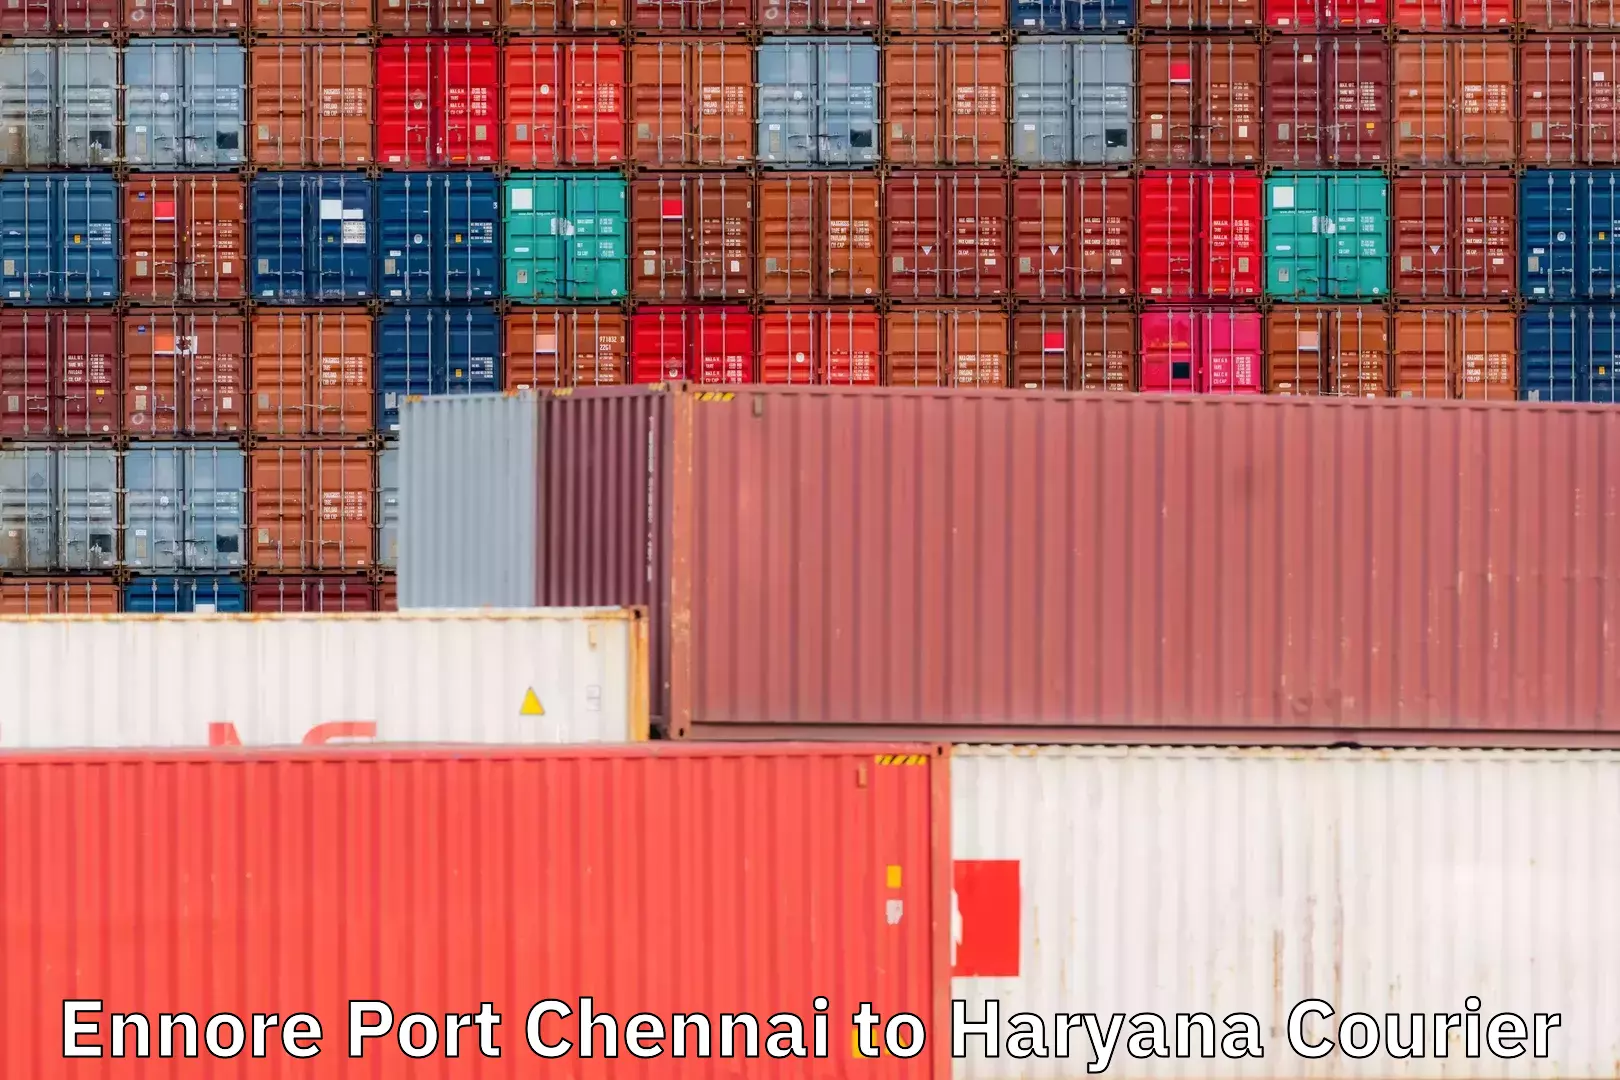 Efficient shipping operations Ennore Port Chennai to Haryana